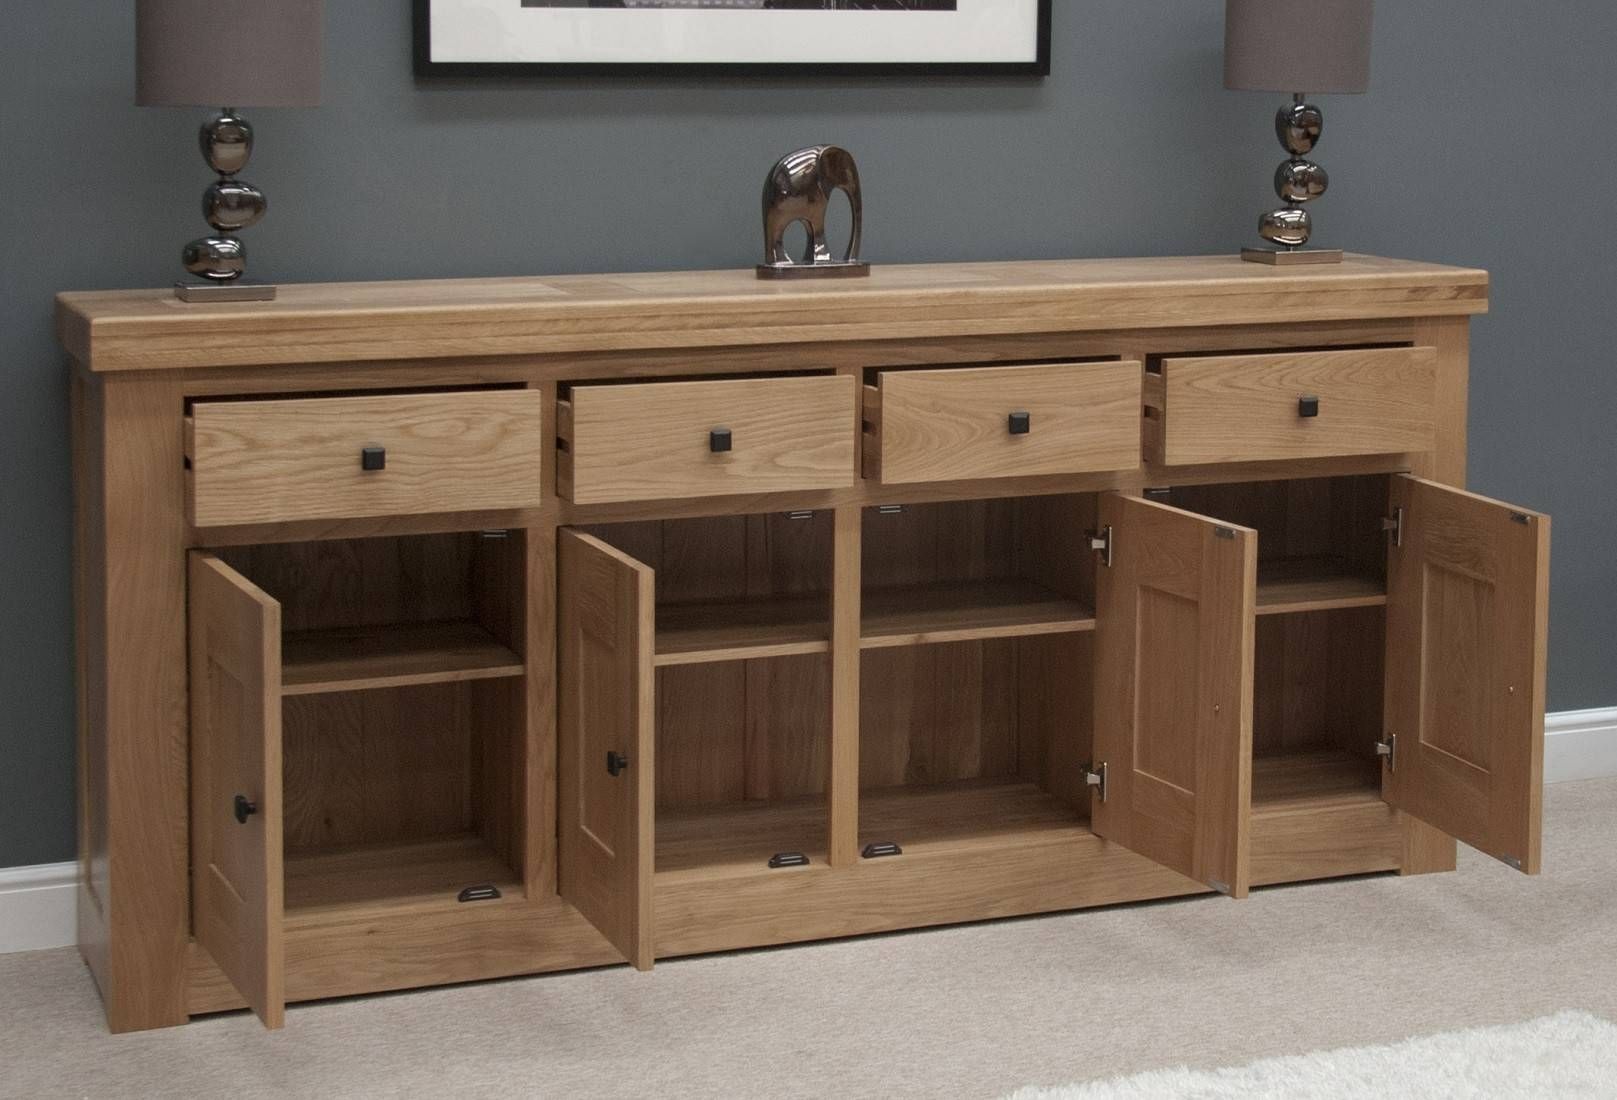 French Bordeaux Oak Extra Large 4 Door Sideboard | Oak Furniture Uk With Regard To Wooden Sideboards (Photo 2 of 15)